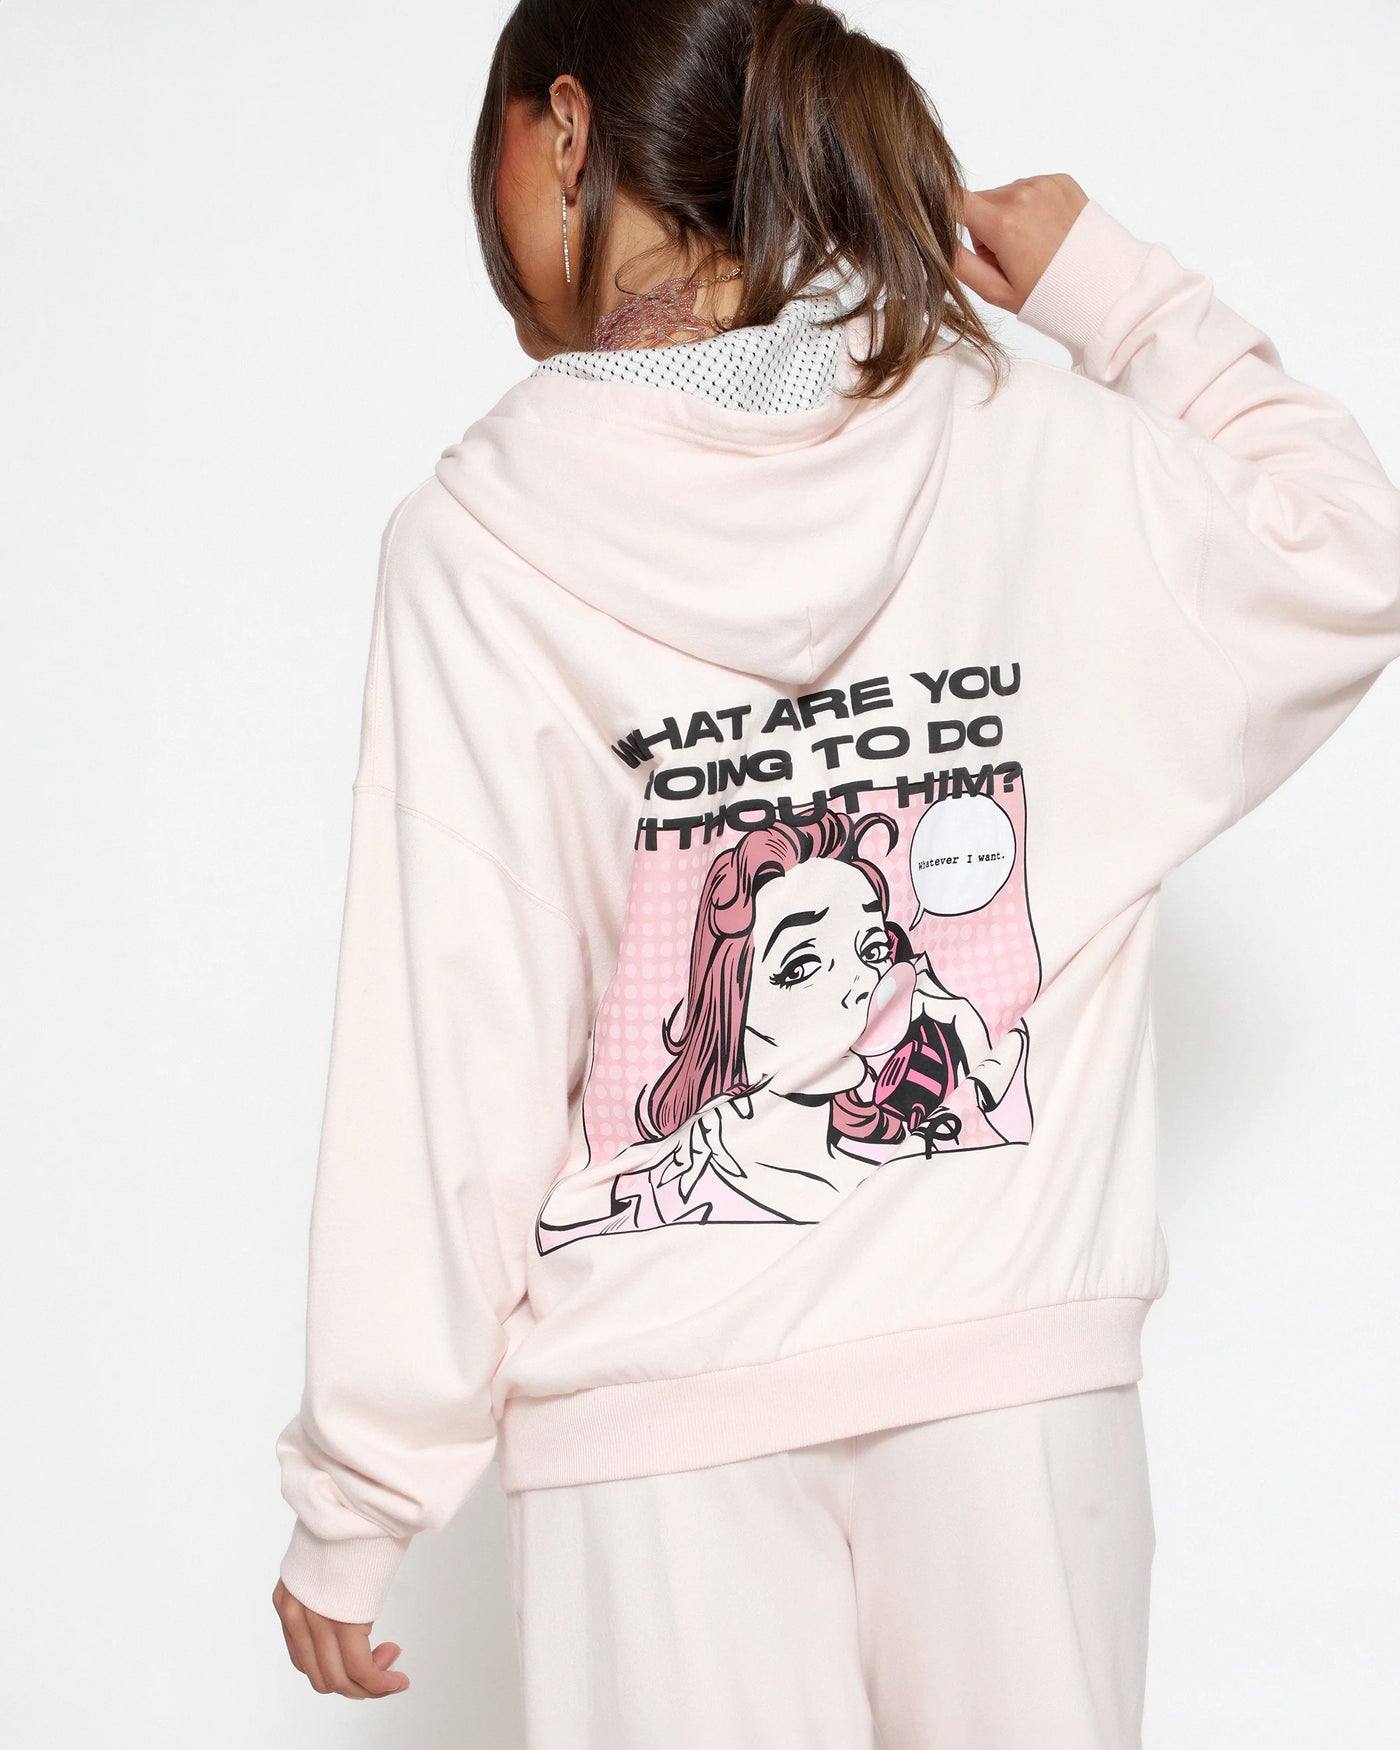 Without Him Remix Zip Up Harley Pink